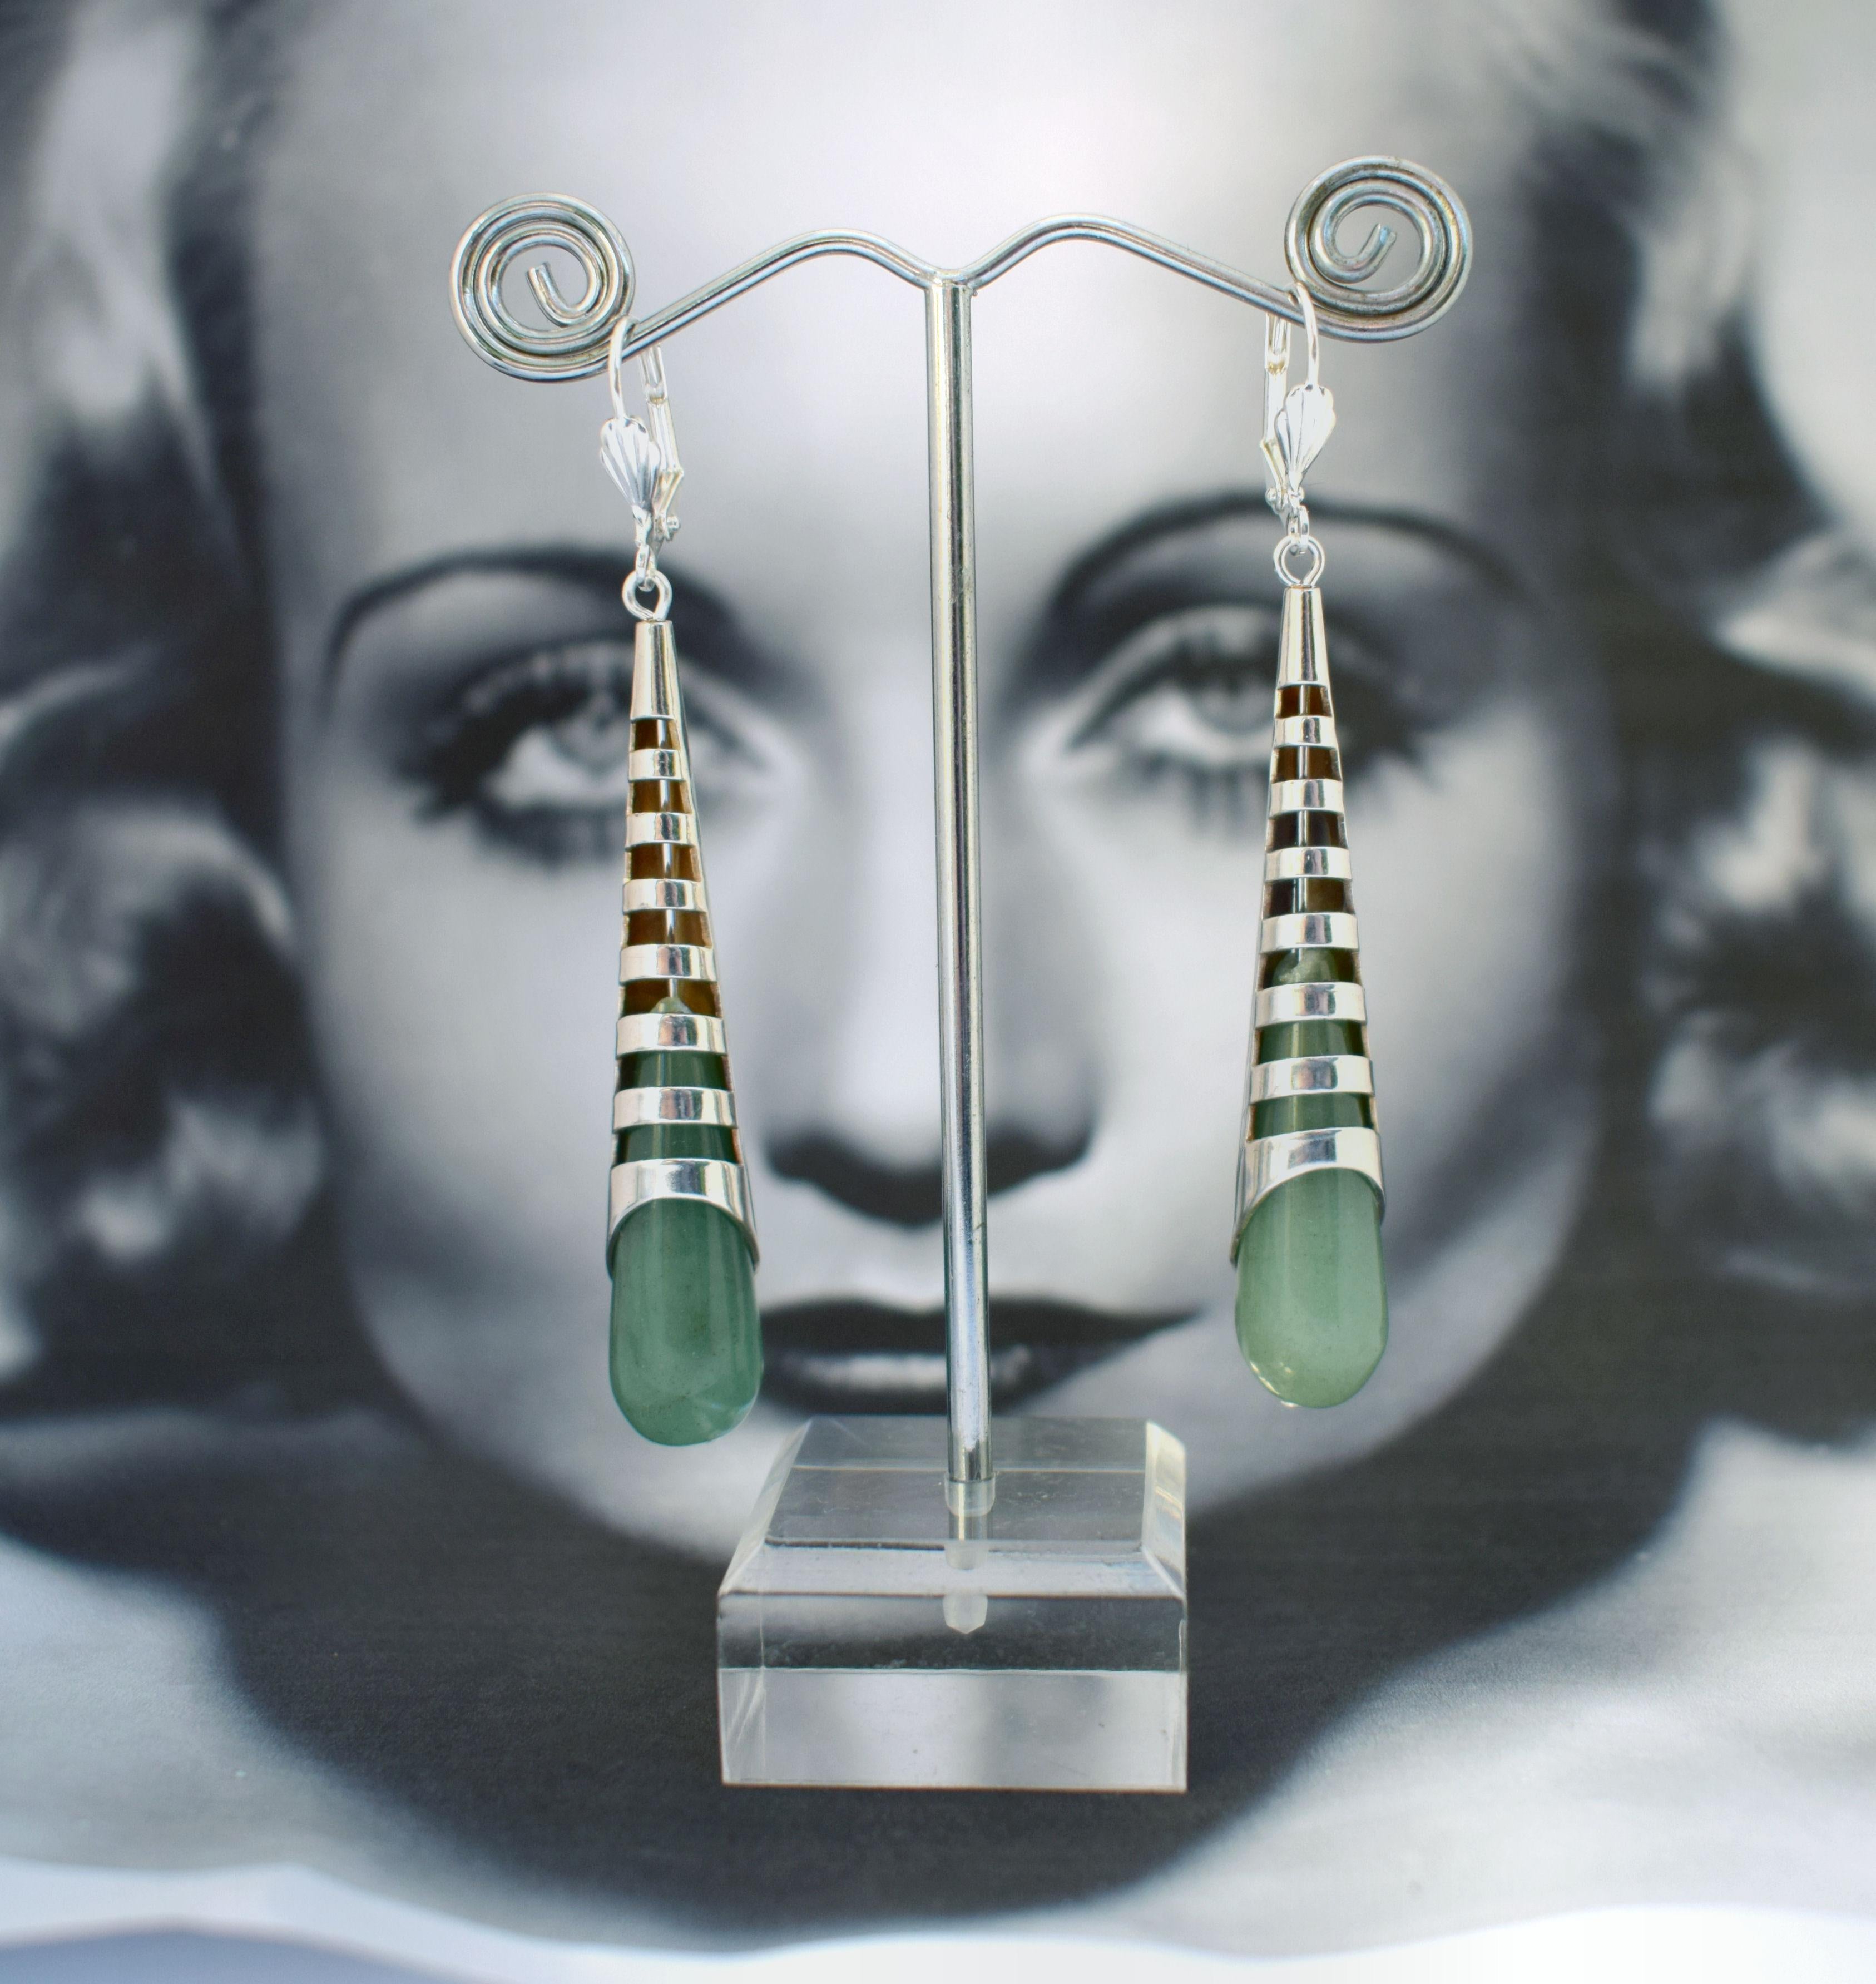 Wonderful pair of Art Deco Style minimalist earrings. This is a very sophisticated piece of jewellery - beautifully made, you wear these at the very best of events. These earrings are made from silver plated brass and green glass and are in